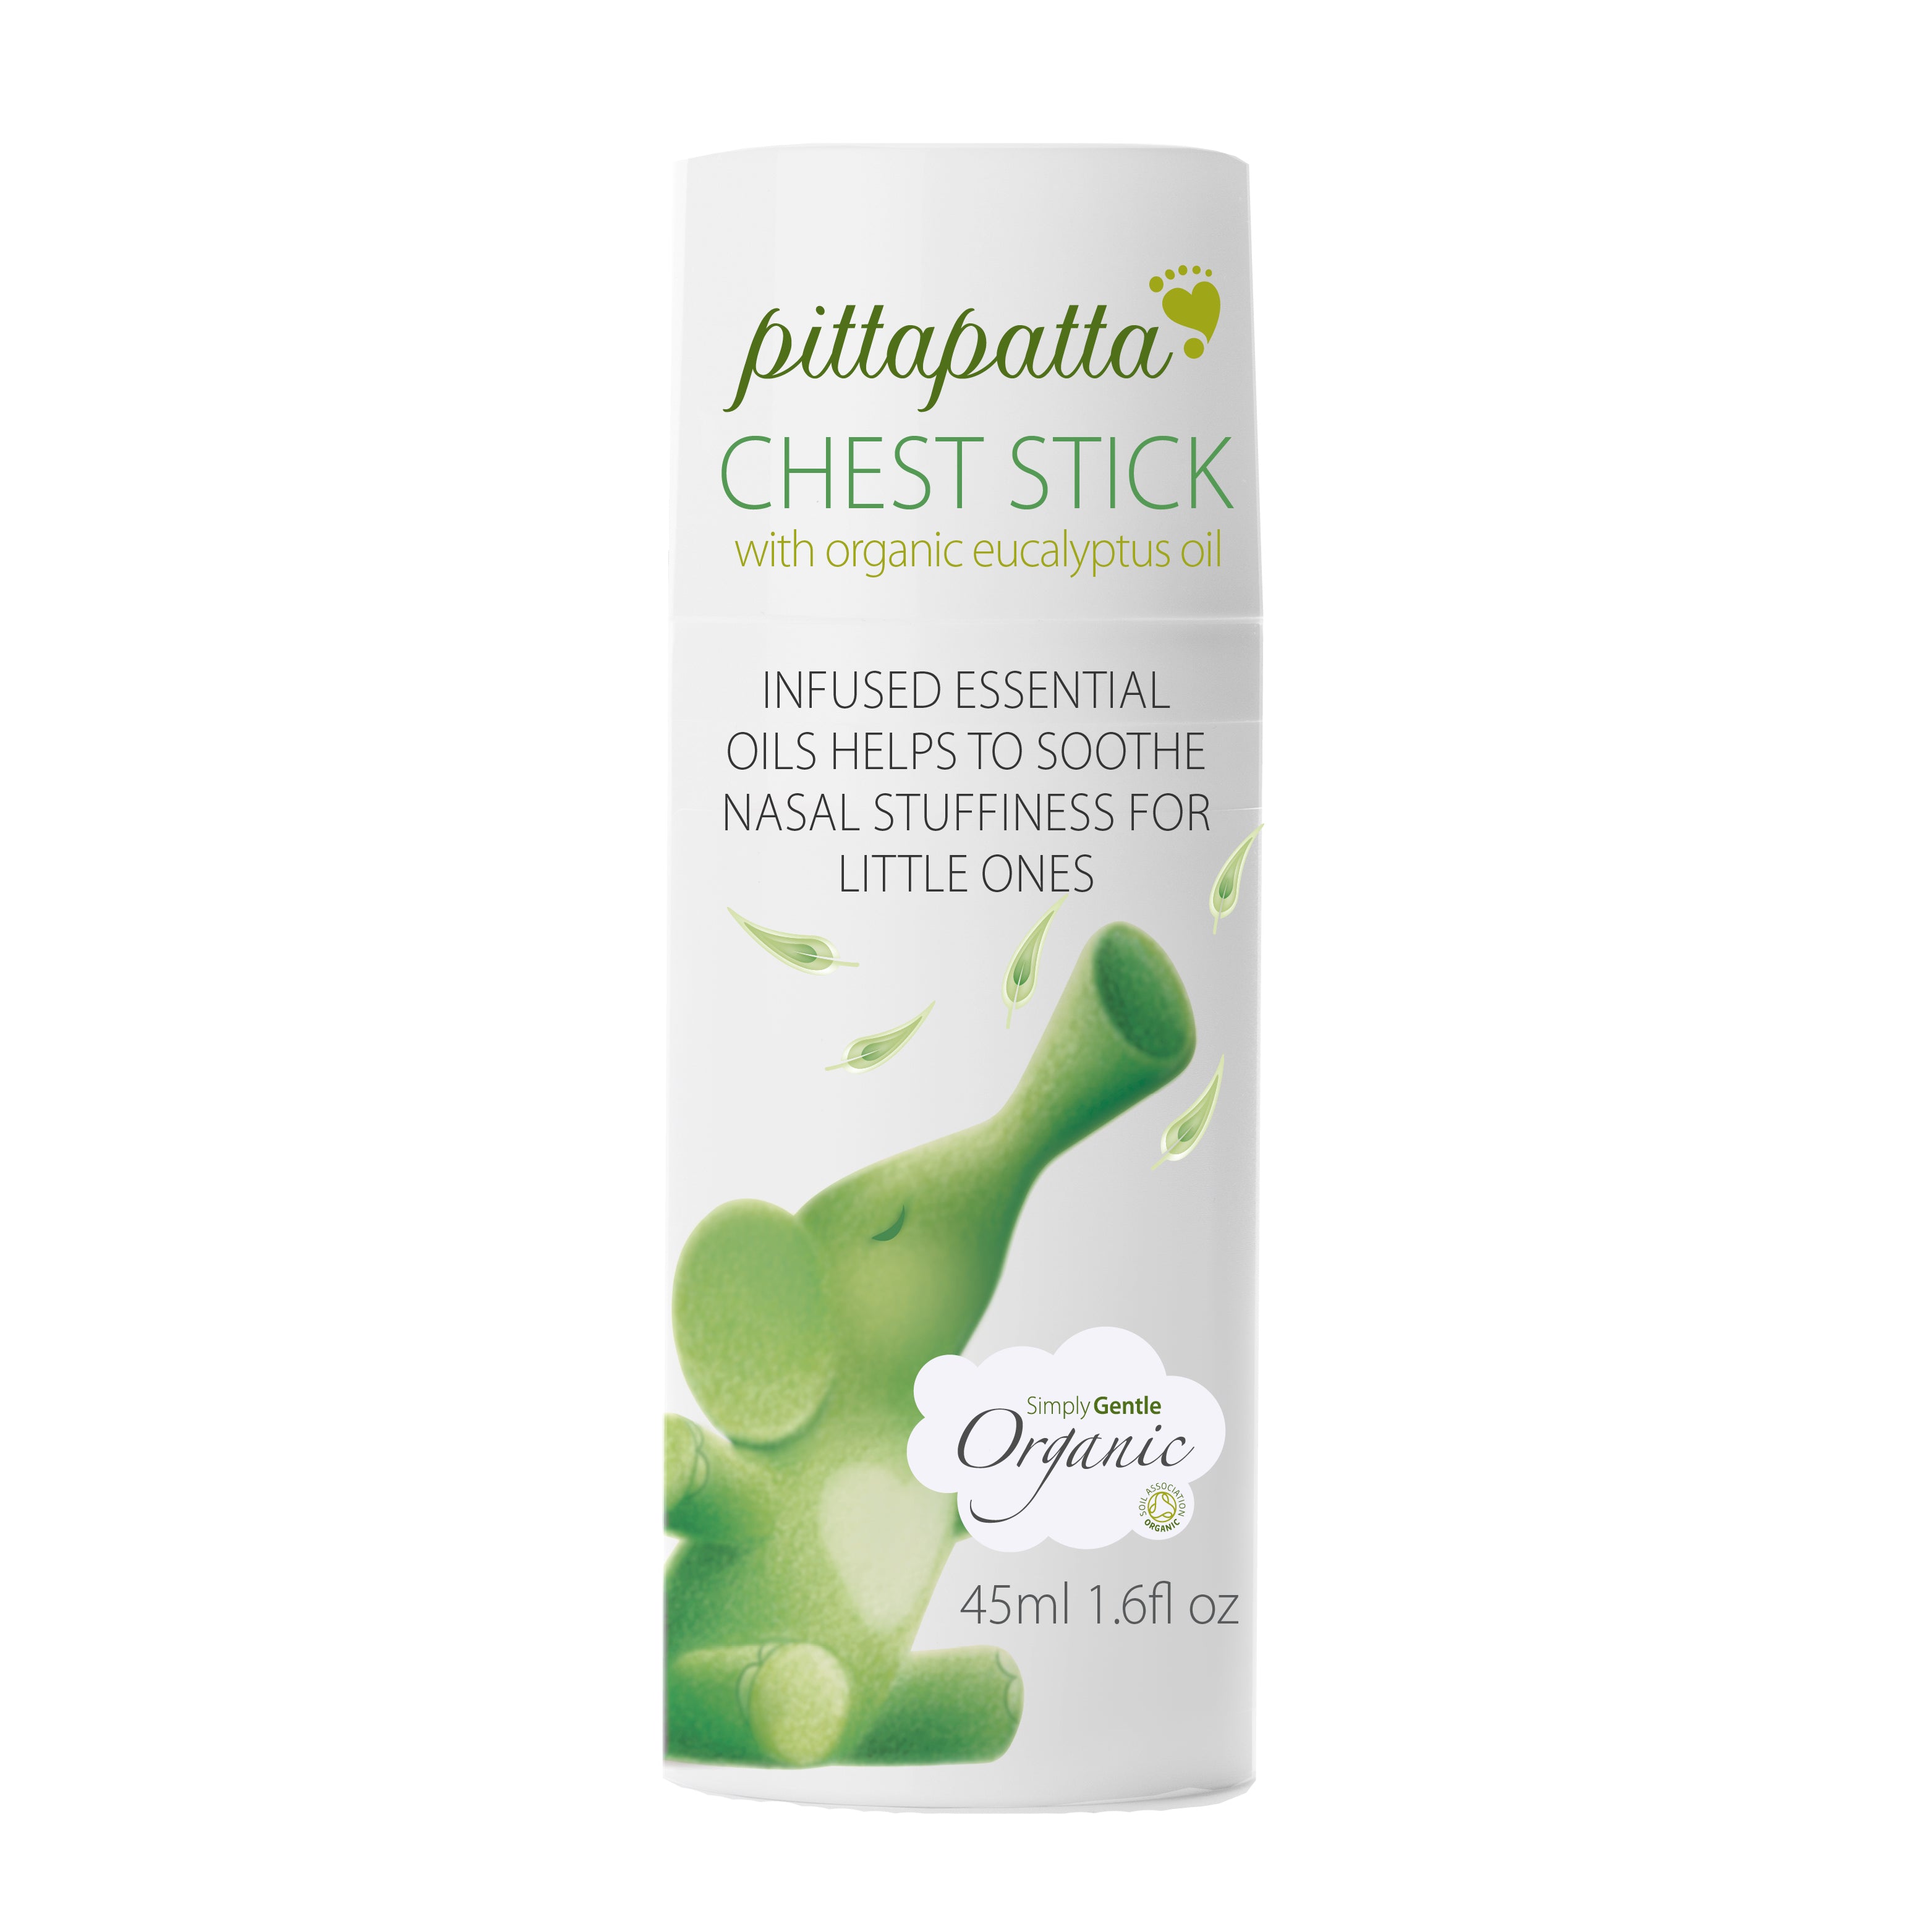 Pittapatta Chest Stick with organic eucalyptus oil carefully formulated to create no mess when applied to chest and back of little ones